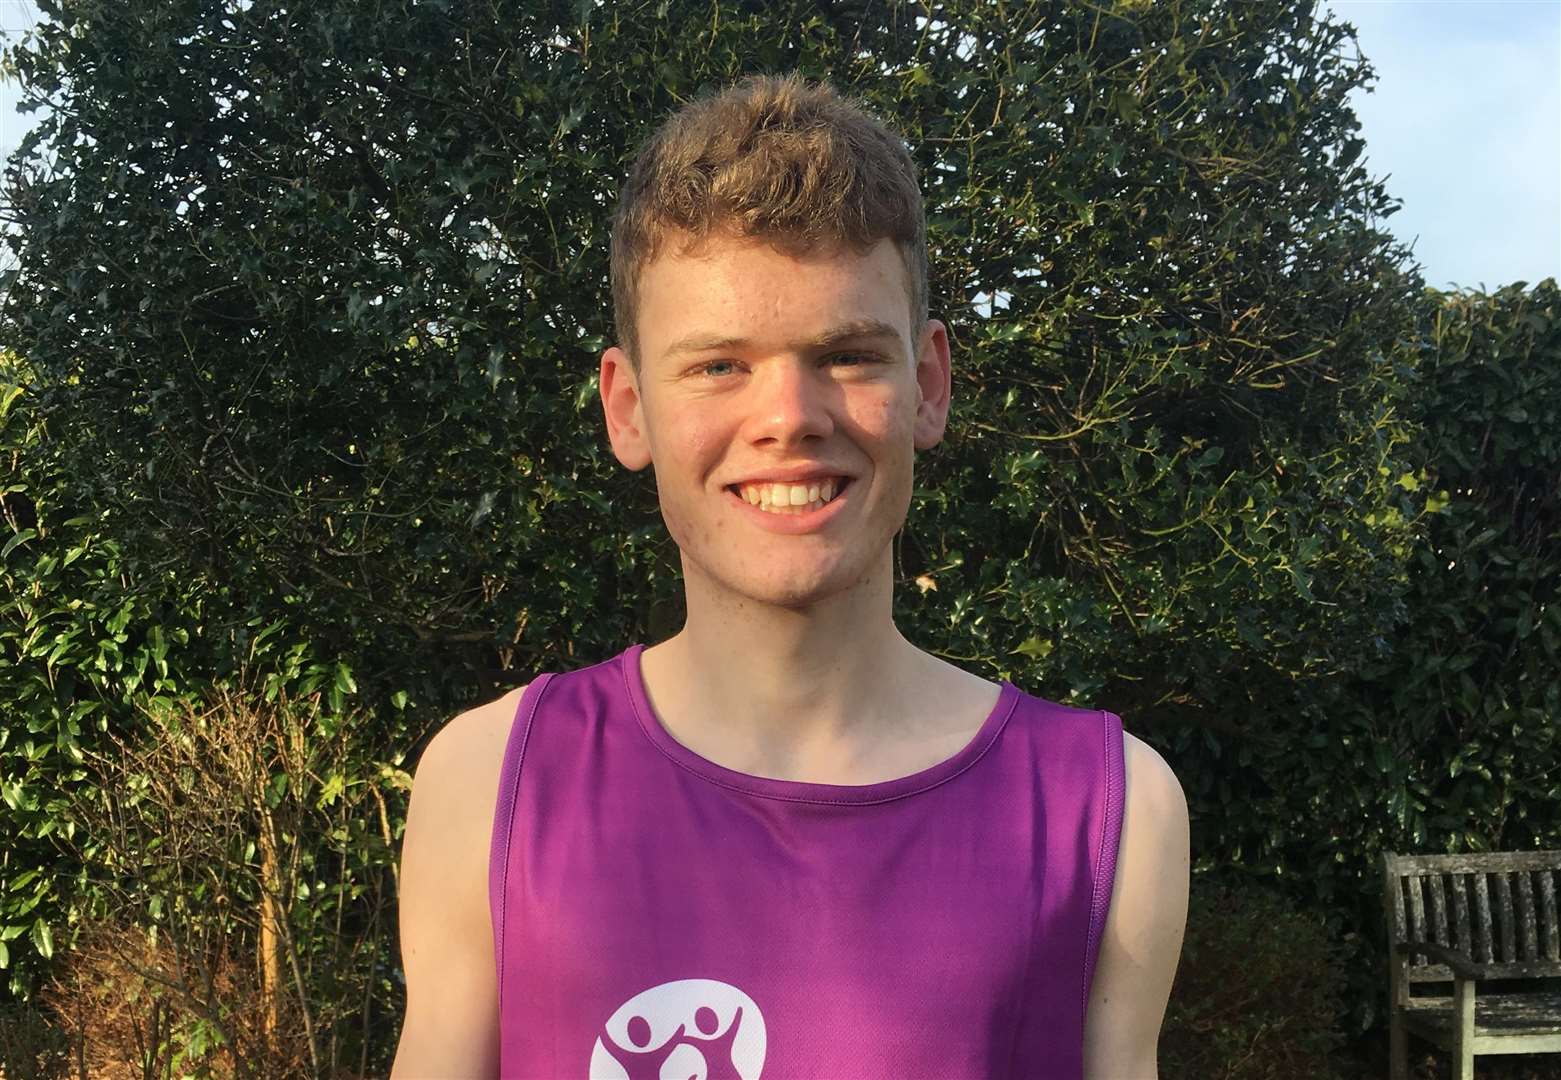 Ben has been inspired to take on the half marathon for the National Deaf Children's Society